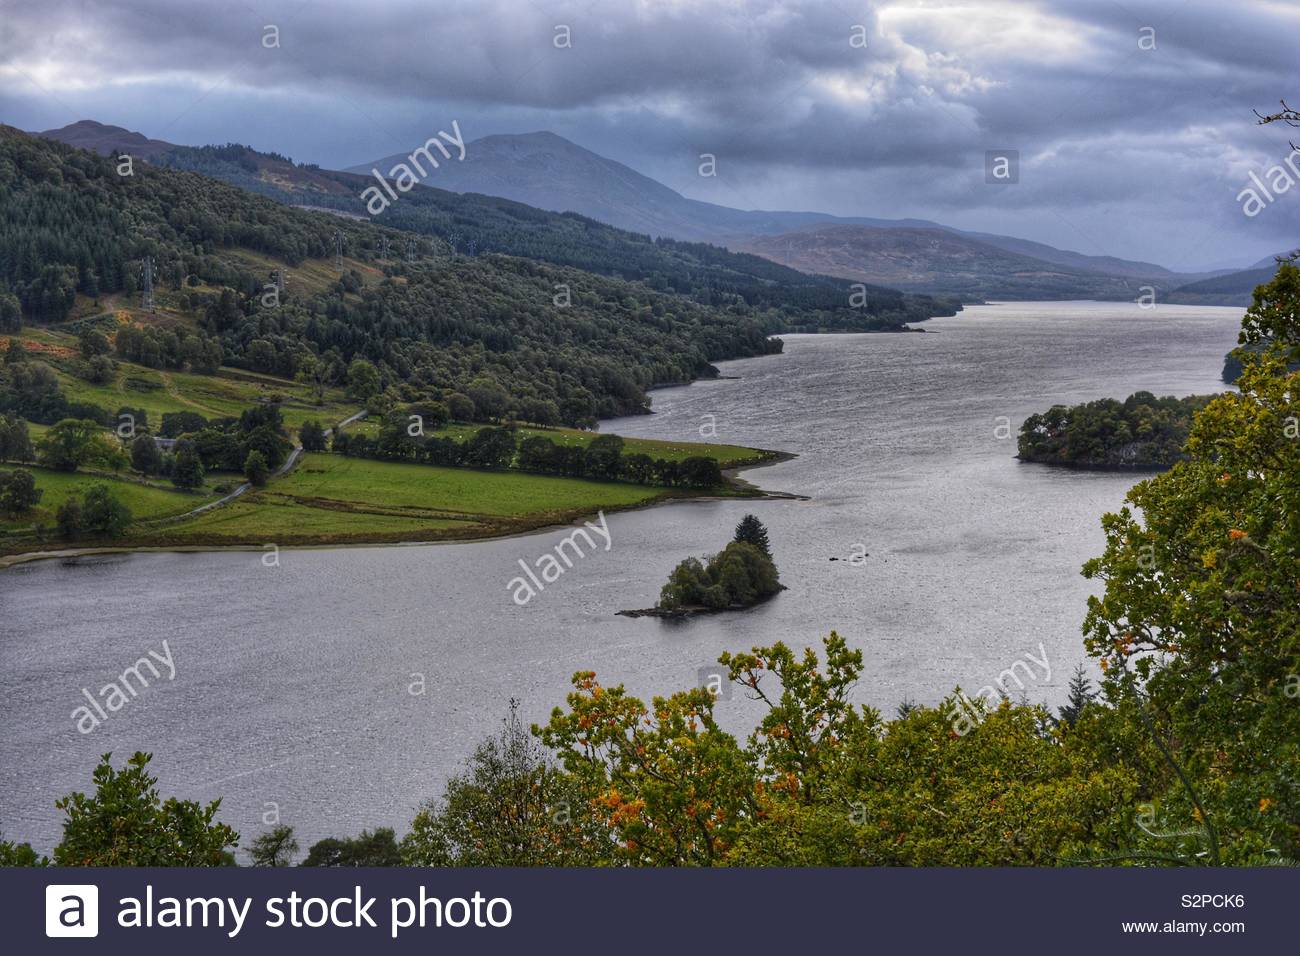 Queen’sView, looking west over Loch Tummel, on a stormy autumn day, Pitlochry, Perthshire, Scotland. Stock Photo